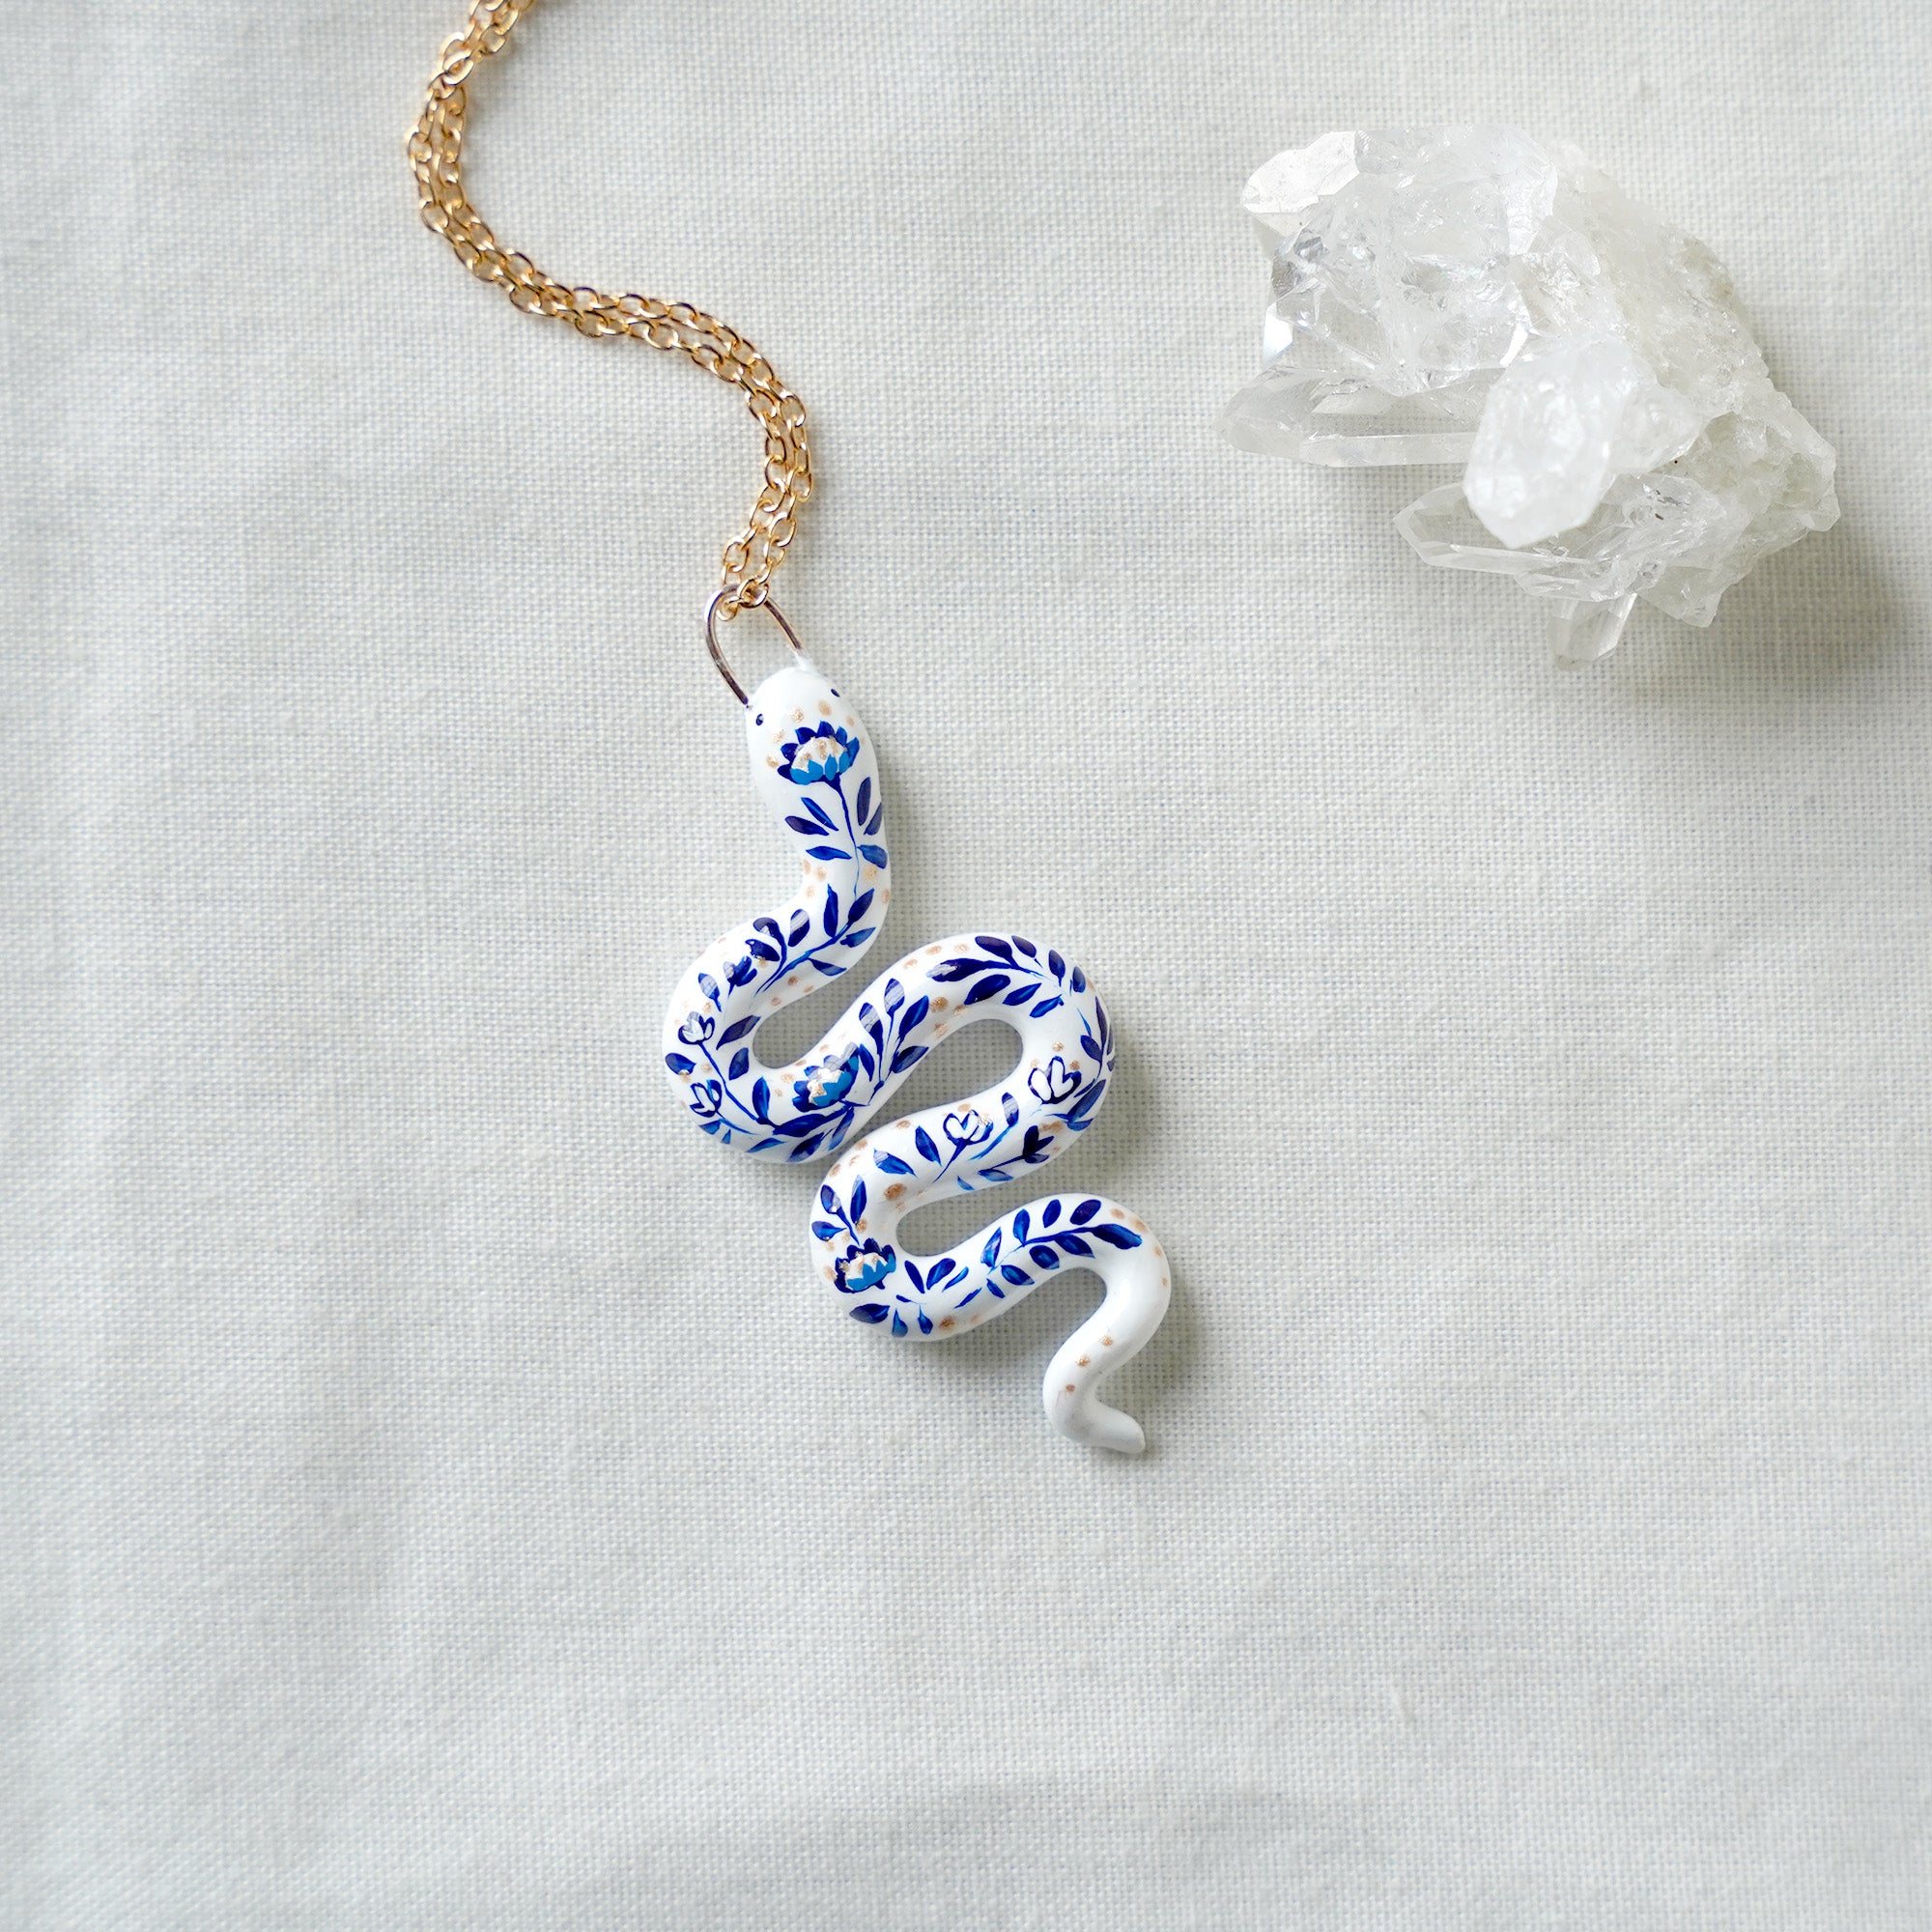 Snake with blue flowers necklace